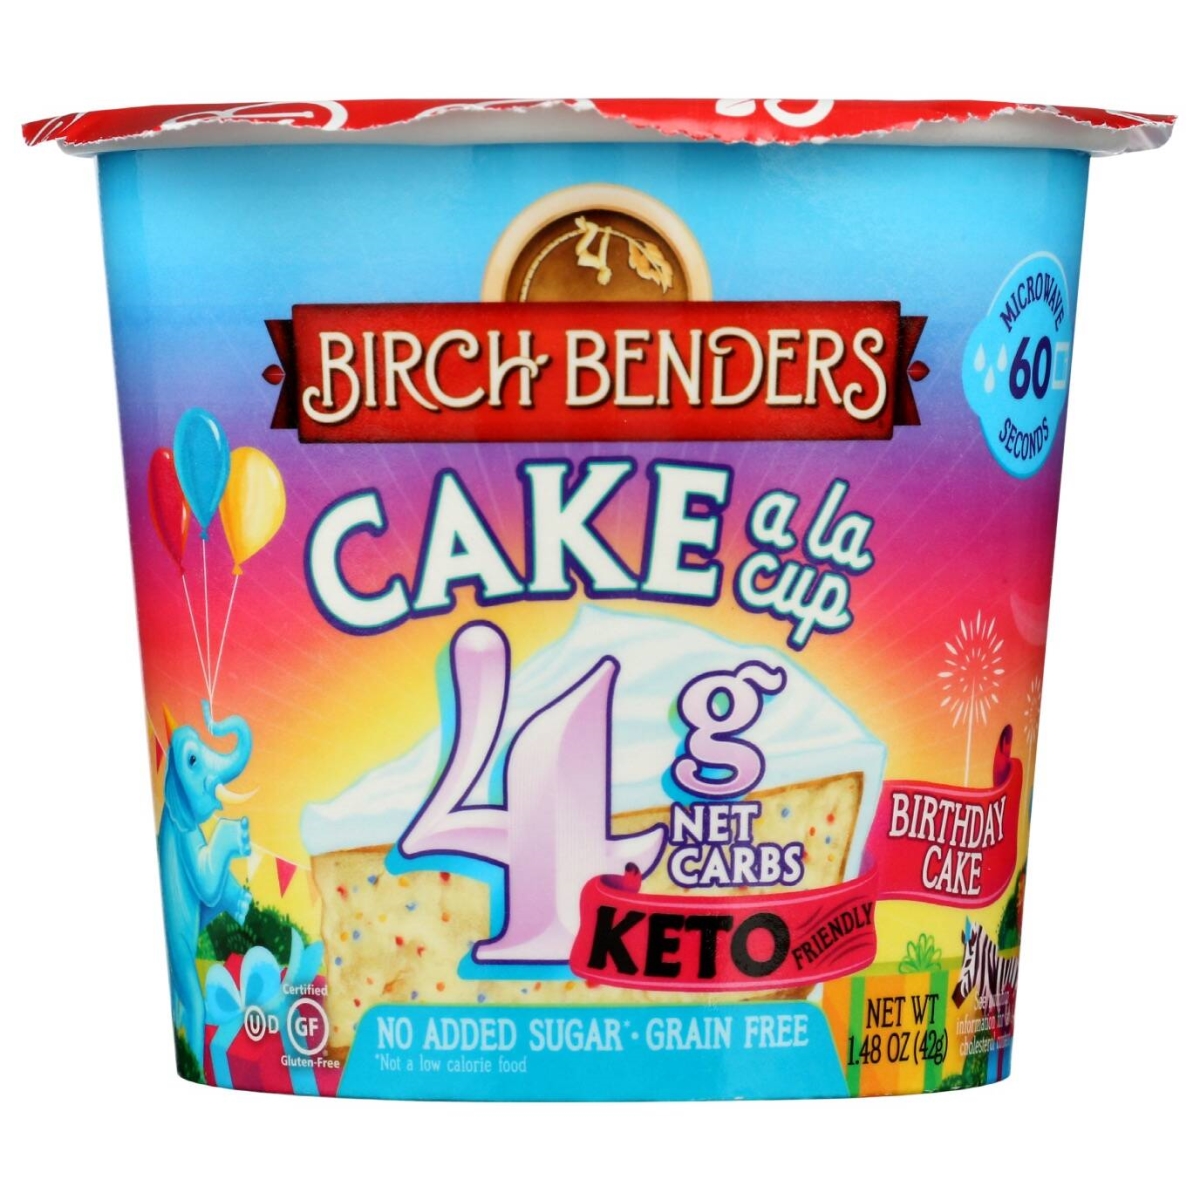 Picture of Birch Benders KHRM00353848 1.48 oz Baking Cup Birthday Cake